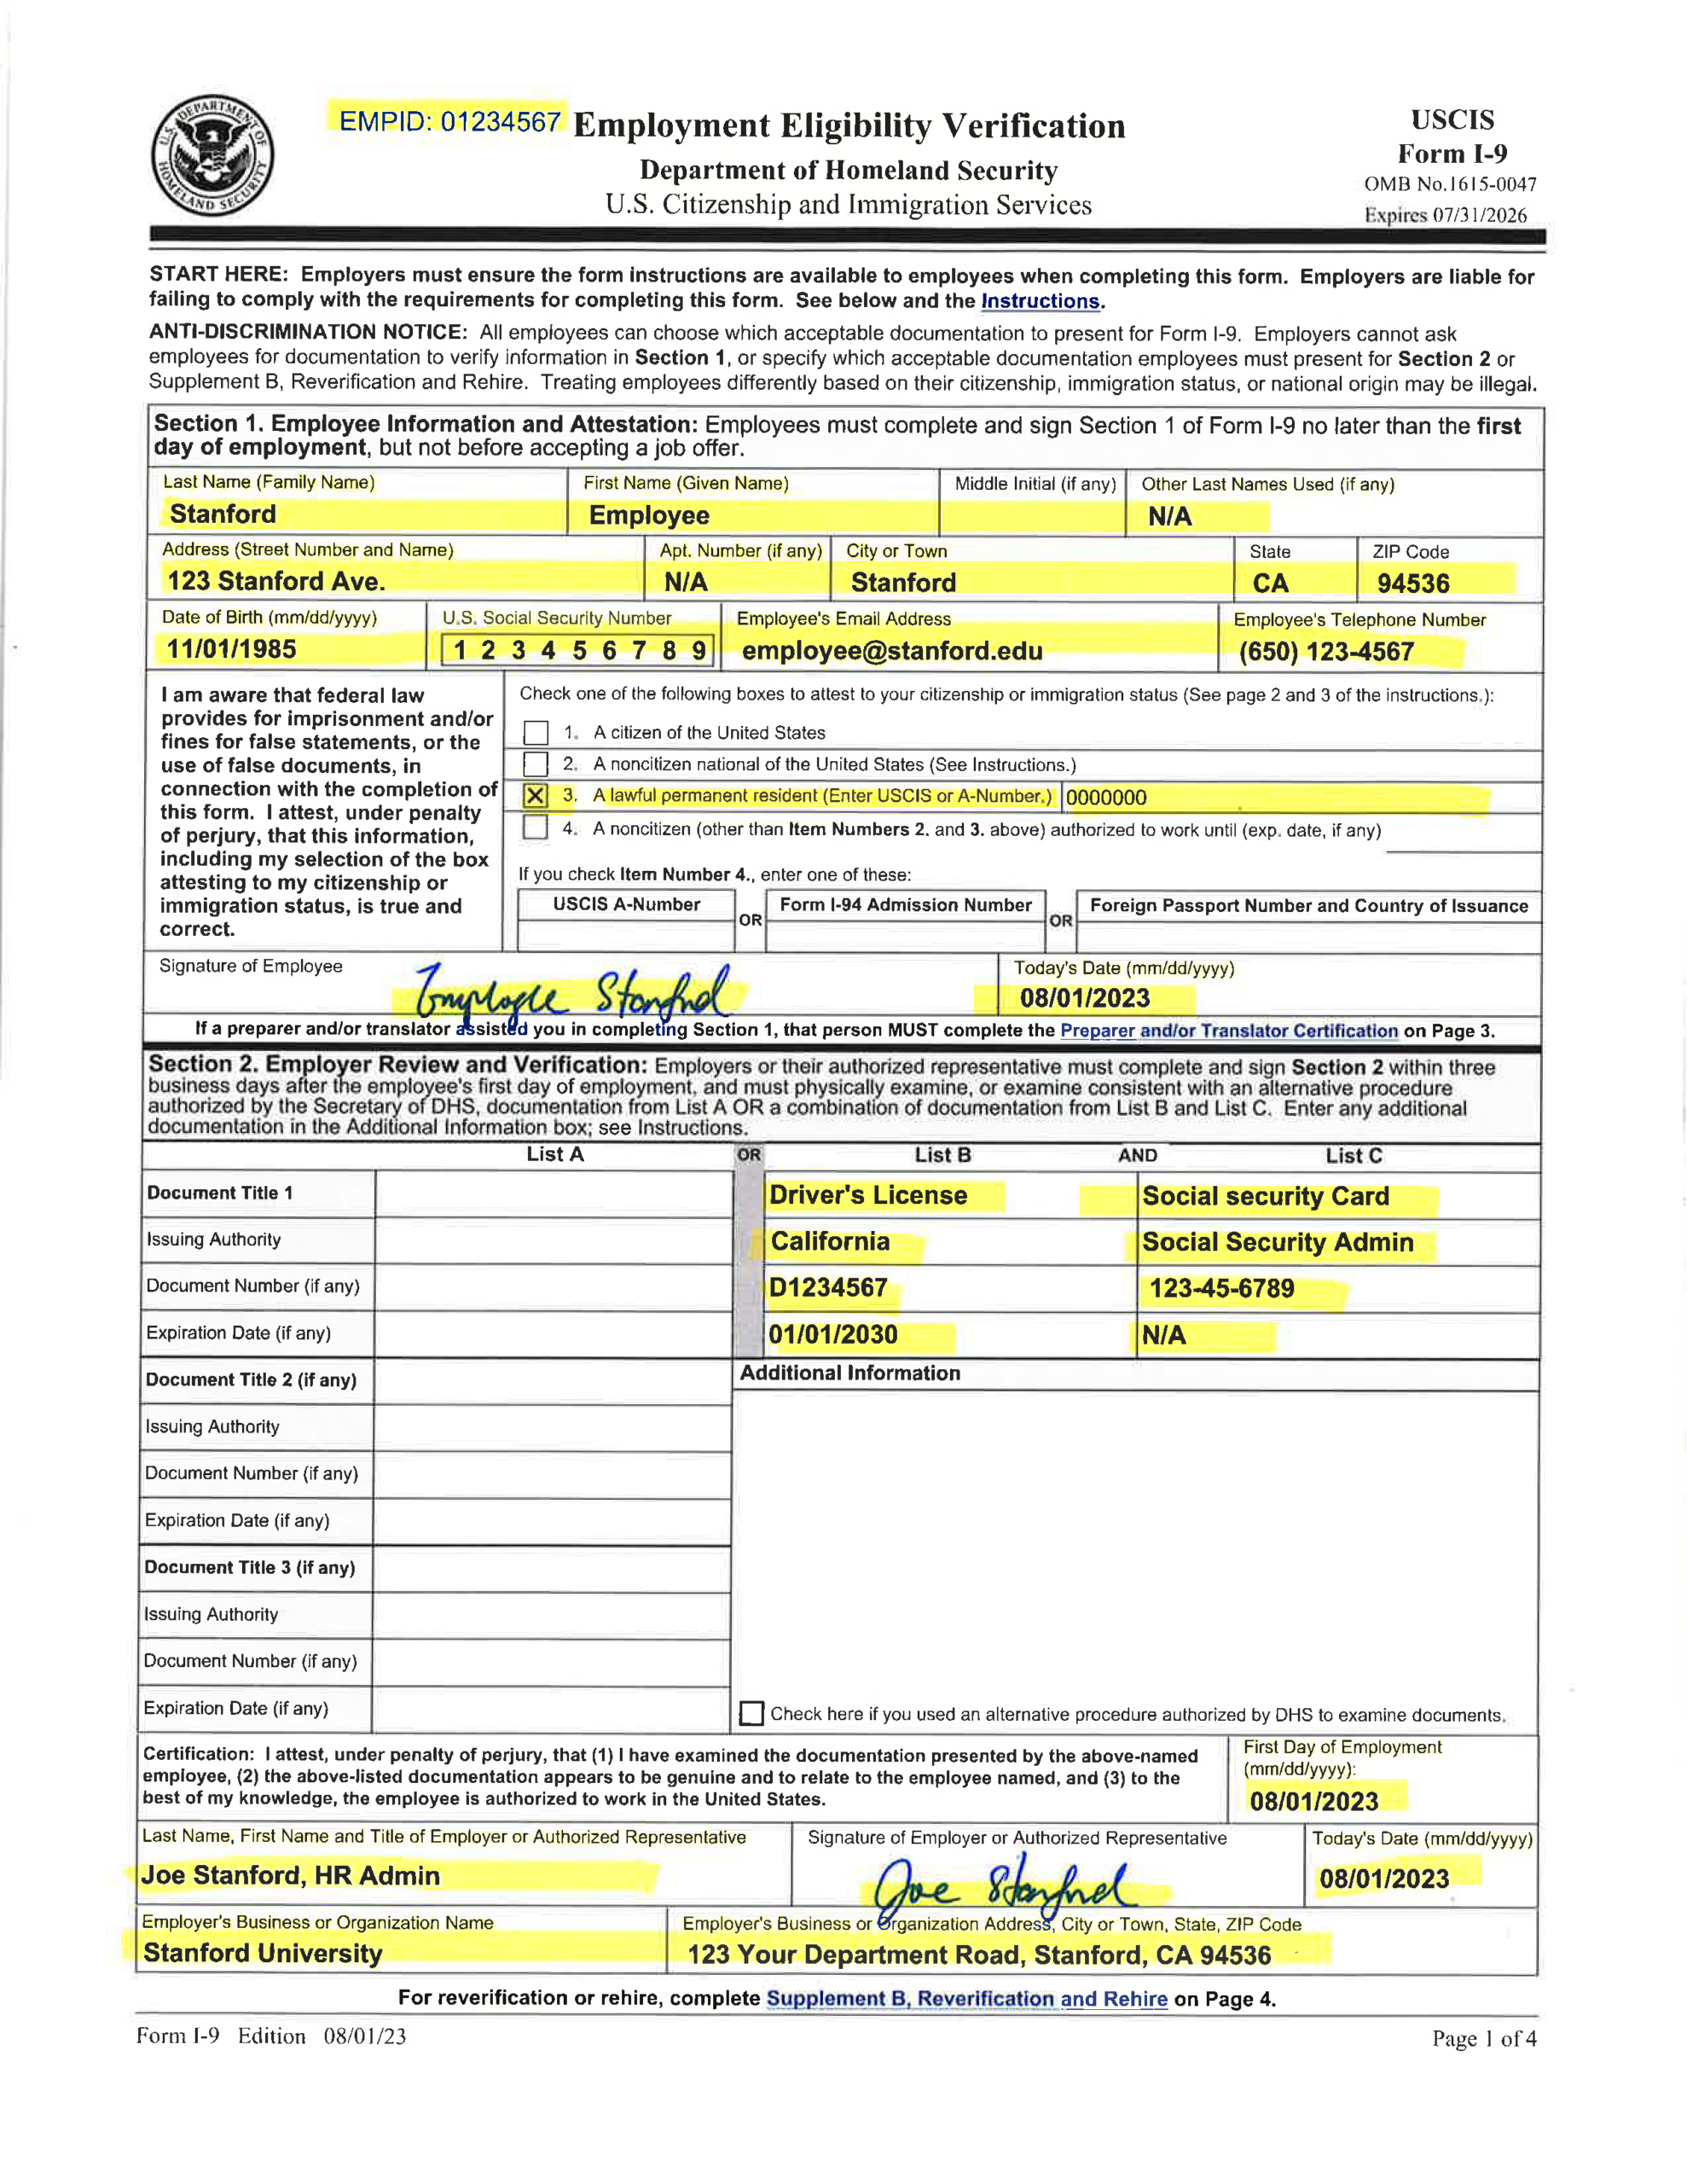 Examples Of Completed Form I-9 For Stanford within What is USCIS I-9 Form